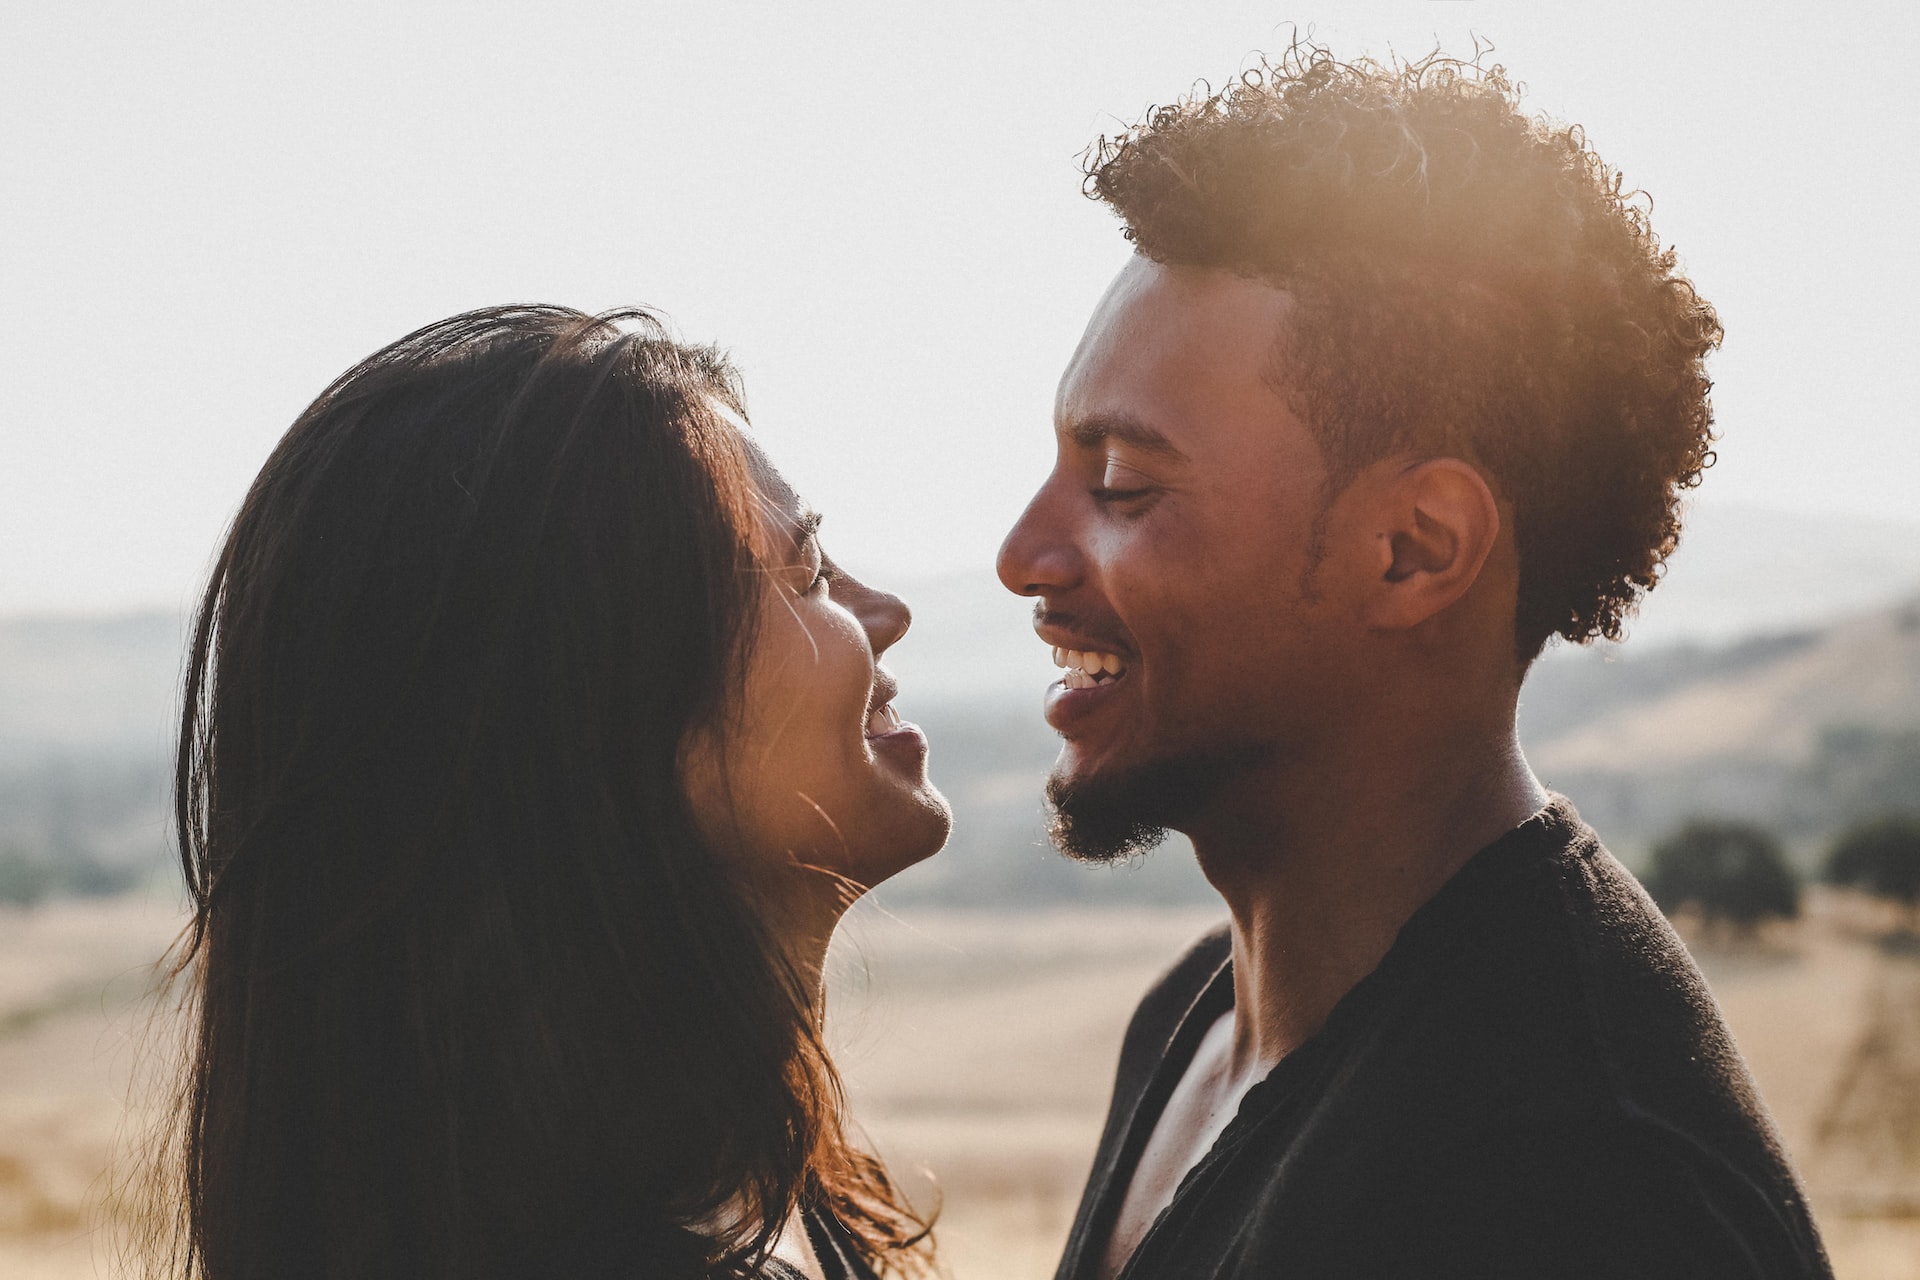 5 Suggestions for Improving Your Dating Life